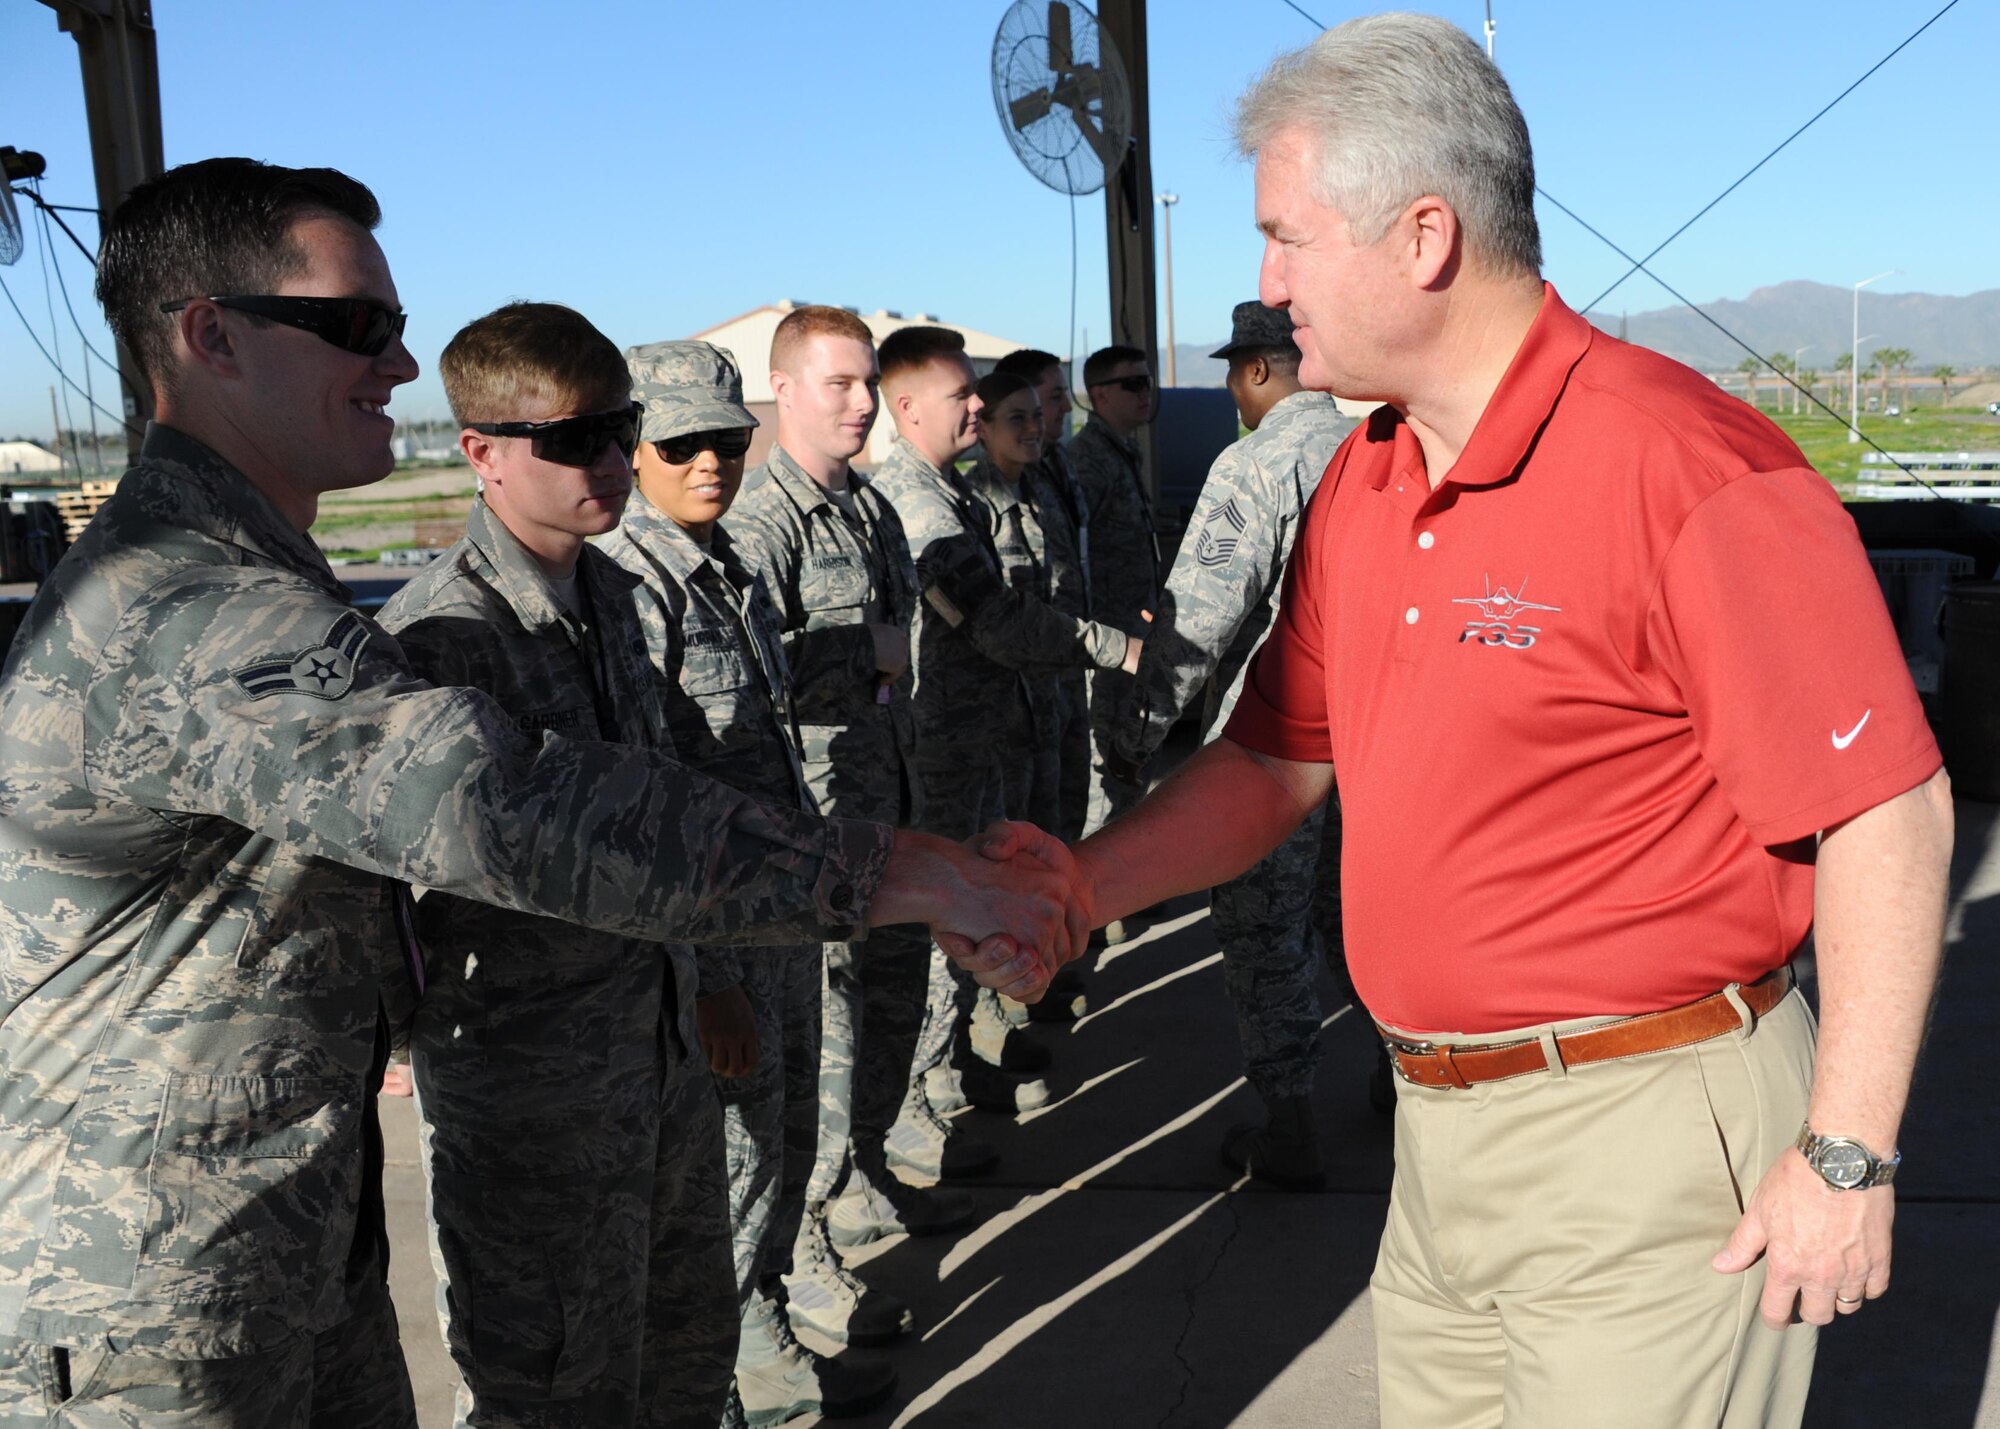 Retired Chief Master Sgt. of the Air Force Gerald Murray greets Airmen upon his arrival to the 56th Equipment Maintenance Squadron March 10, 2017, at Luke Air Force Base, Ariz. Murray visited Luke and interacted with Airmen for the entire day sharing his stories and advice from his 29-year career in the Air Force. (U.S. Air Force photo by Airman 1st Class Caleb Worpel)